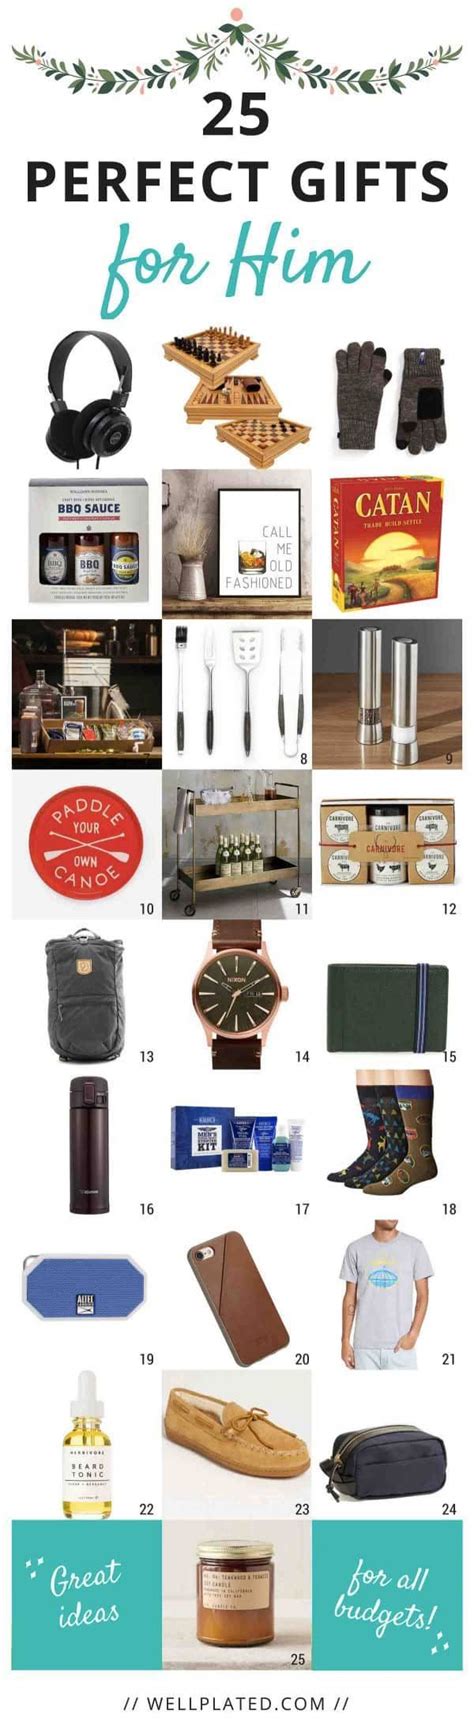 With thousands of presents to choose from in our curated gift collections, we&rsquo;ve made finding the perfect gift as easy as vegemite on toast in the morning! 25 Unique Gift Ideas for Your Husband, Dad, Boyfriend, and ...